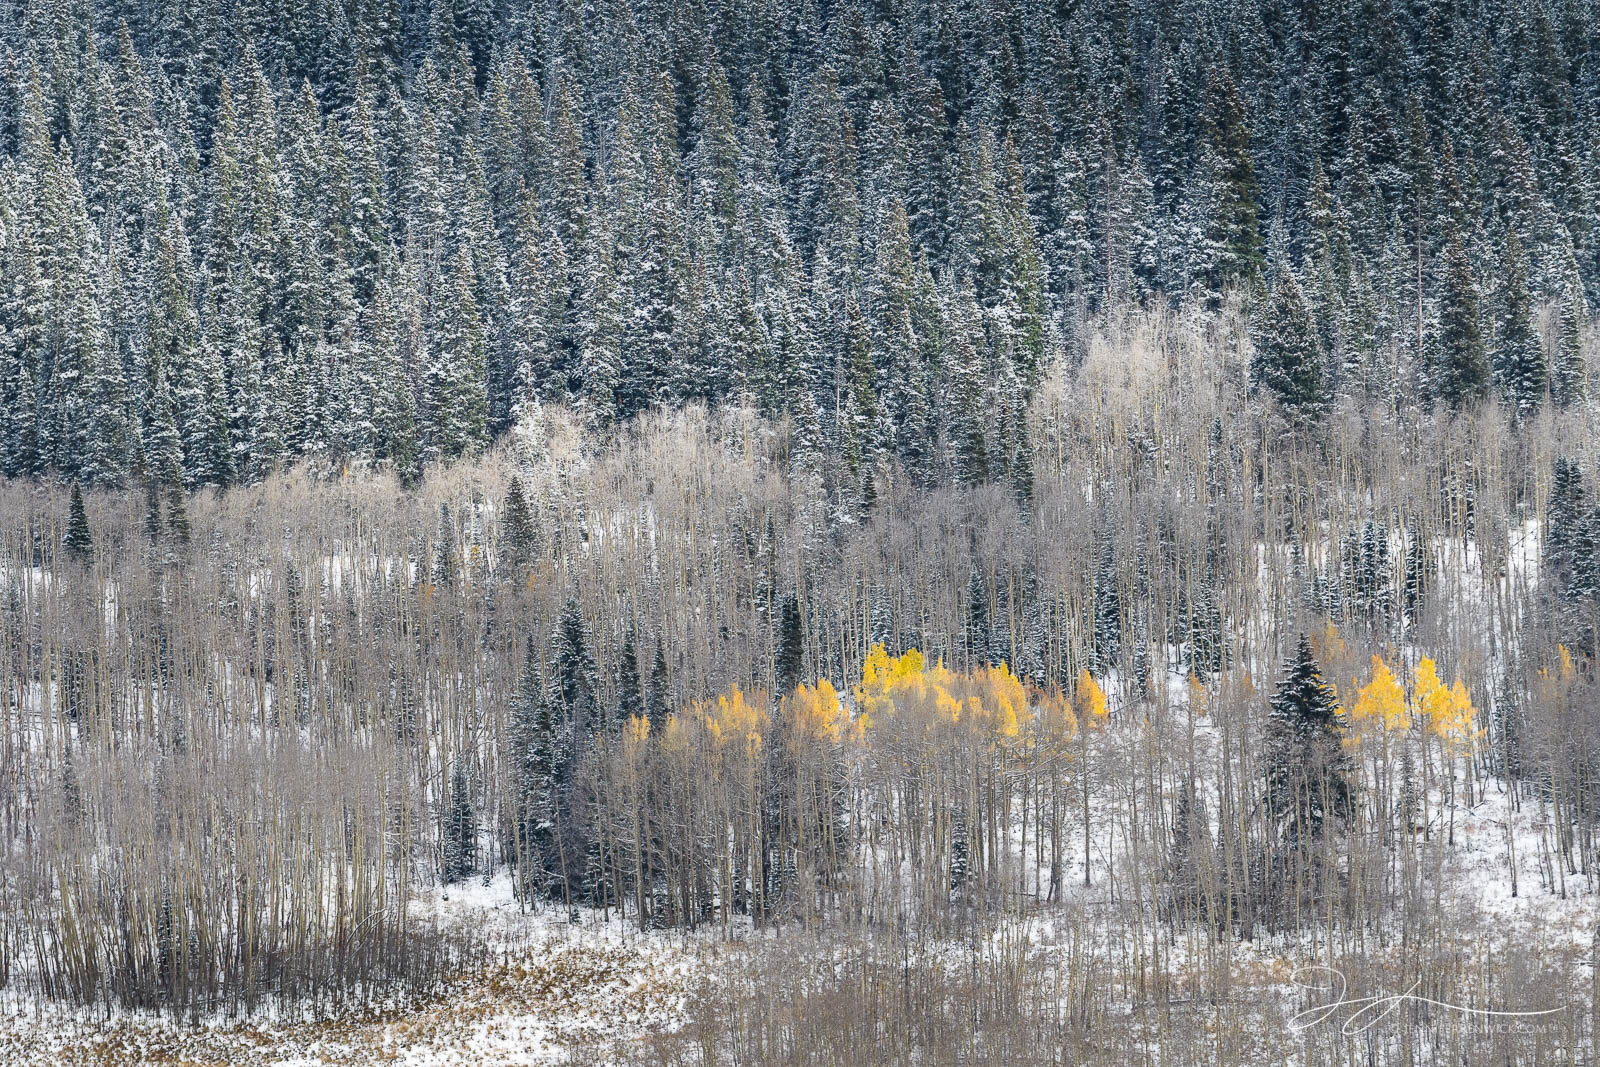 A stand of aspen hangs onto their leaves, while surrounded by already bare aspen trees.